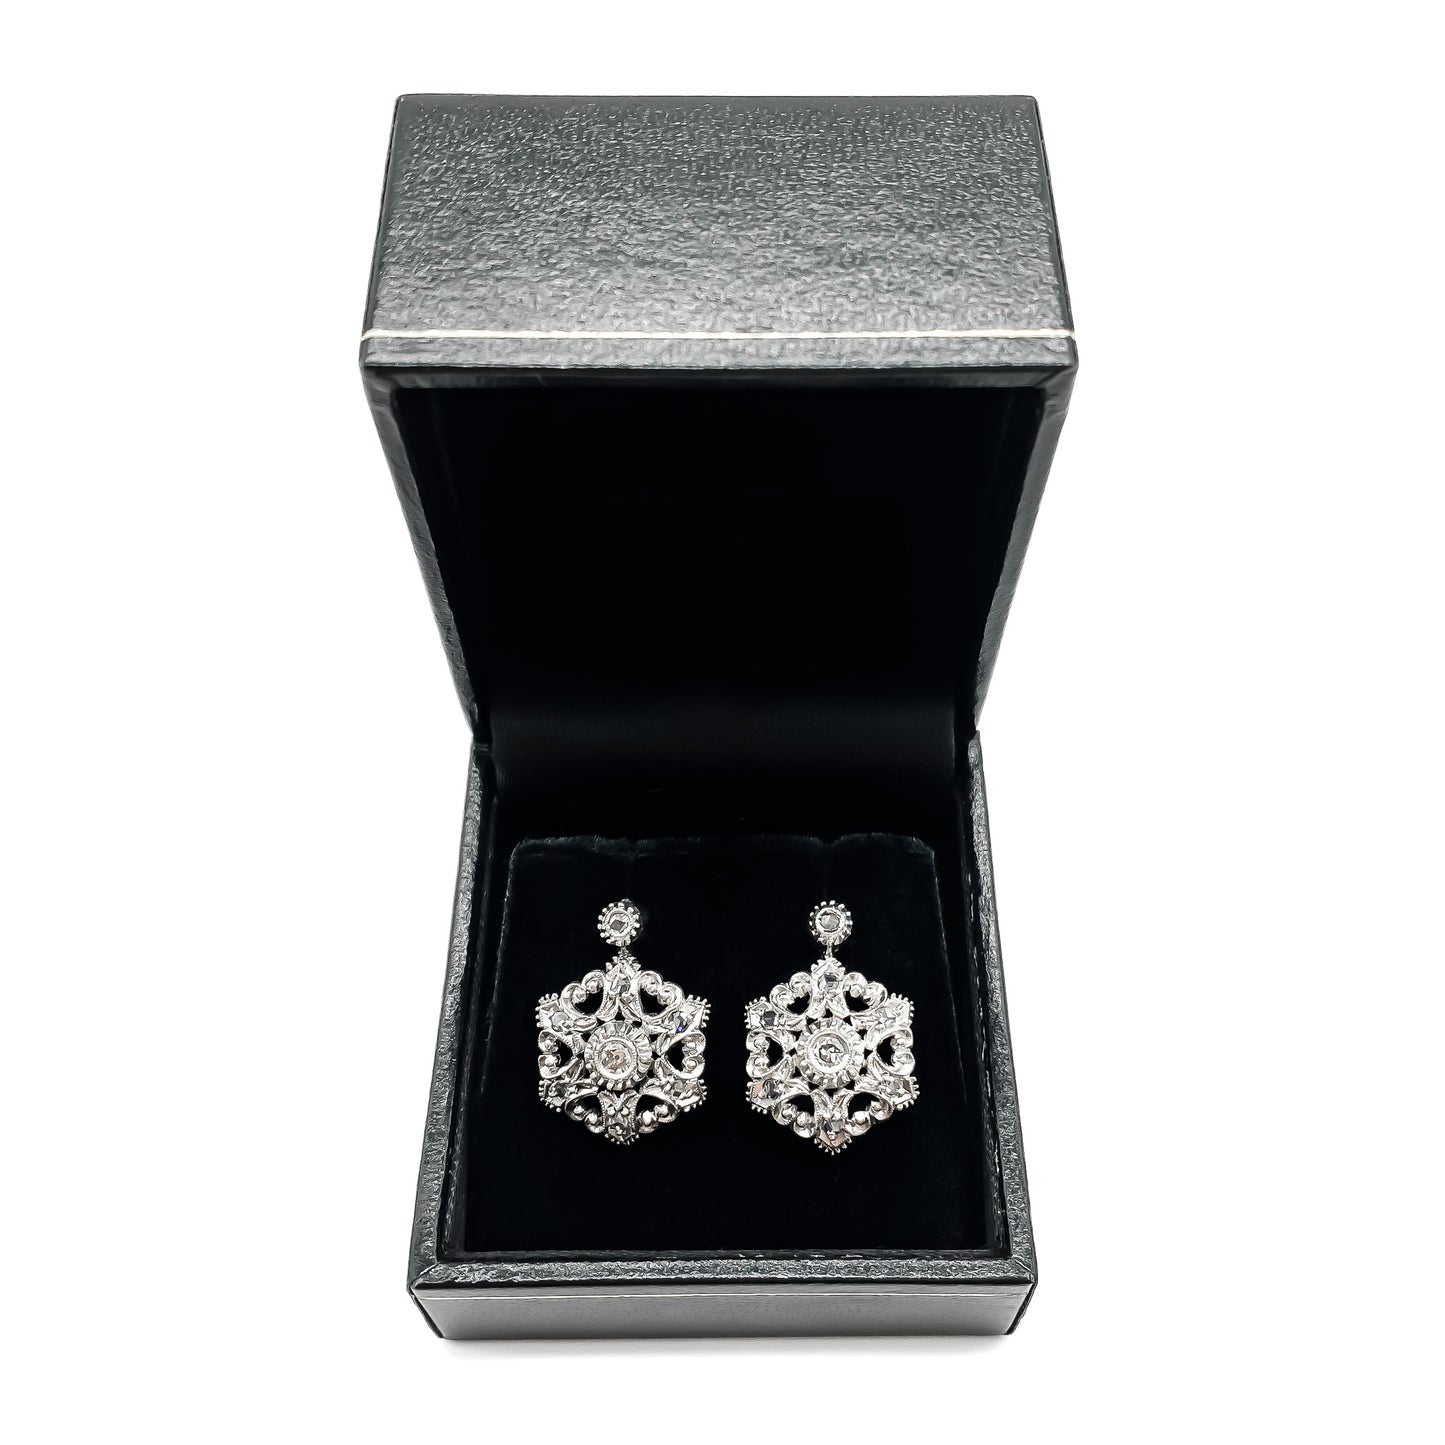 Lovely Victorian 19ct gold and silver old-cut diamond drop earrings with intricate detail.